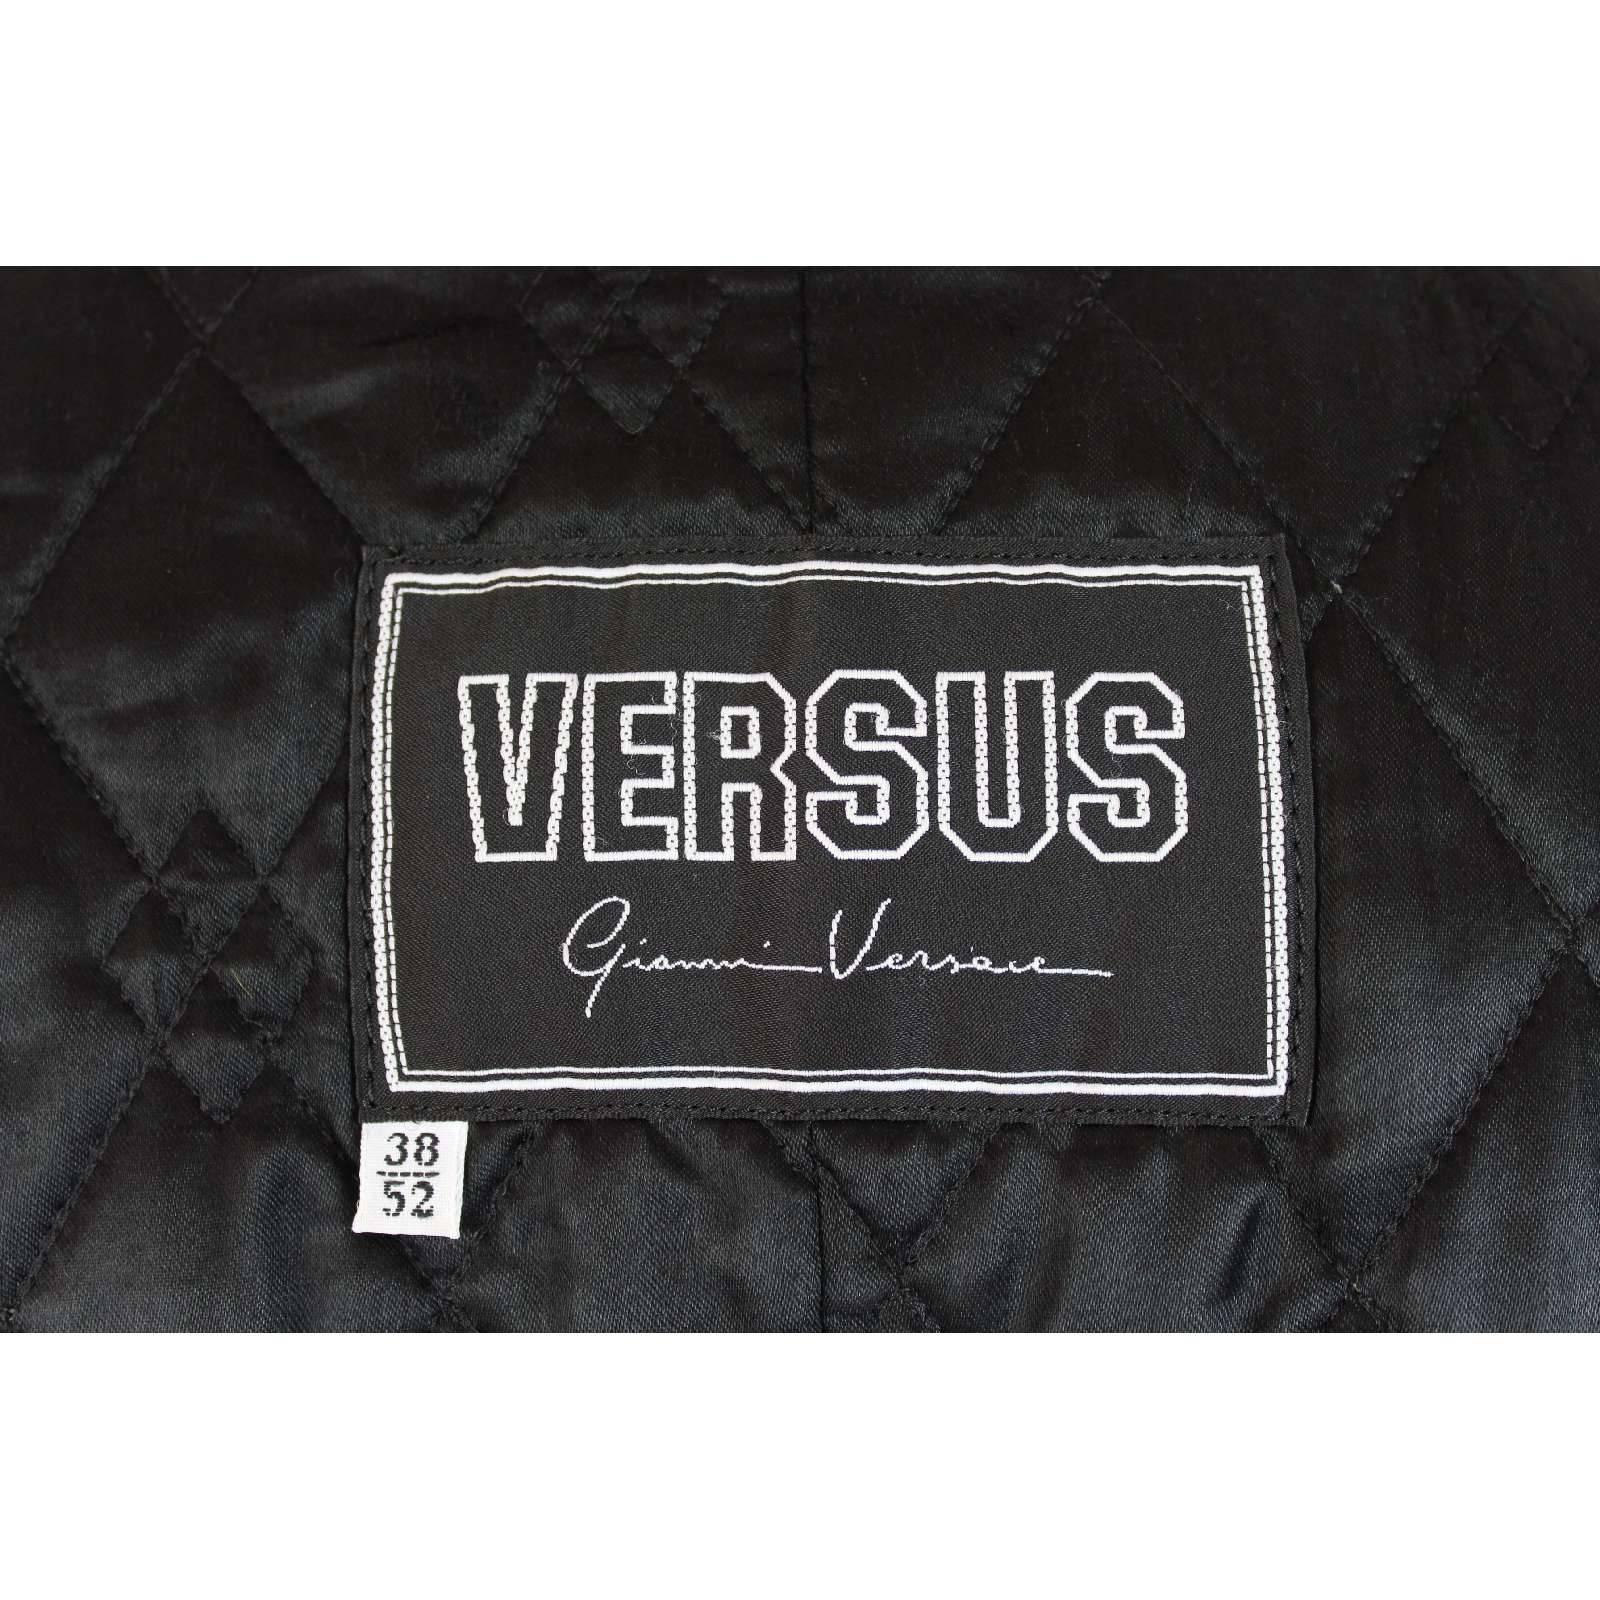 Versus Gianni Versace black leather motorcycle raincoat trench coat size 38/52 For Sale 2